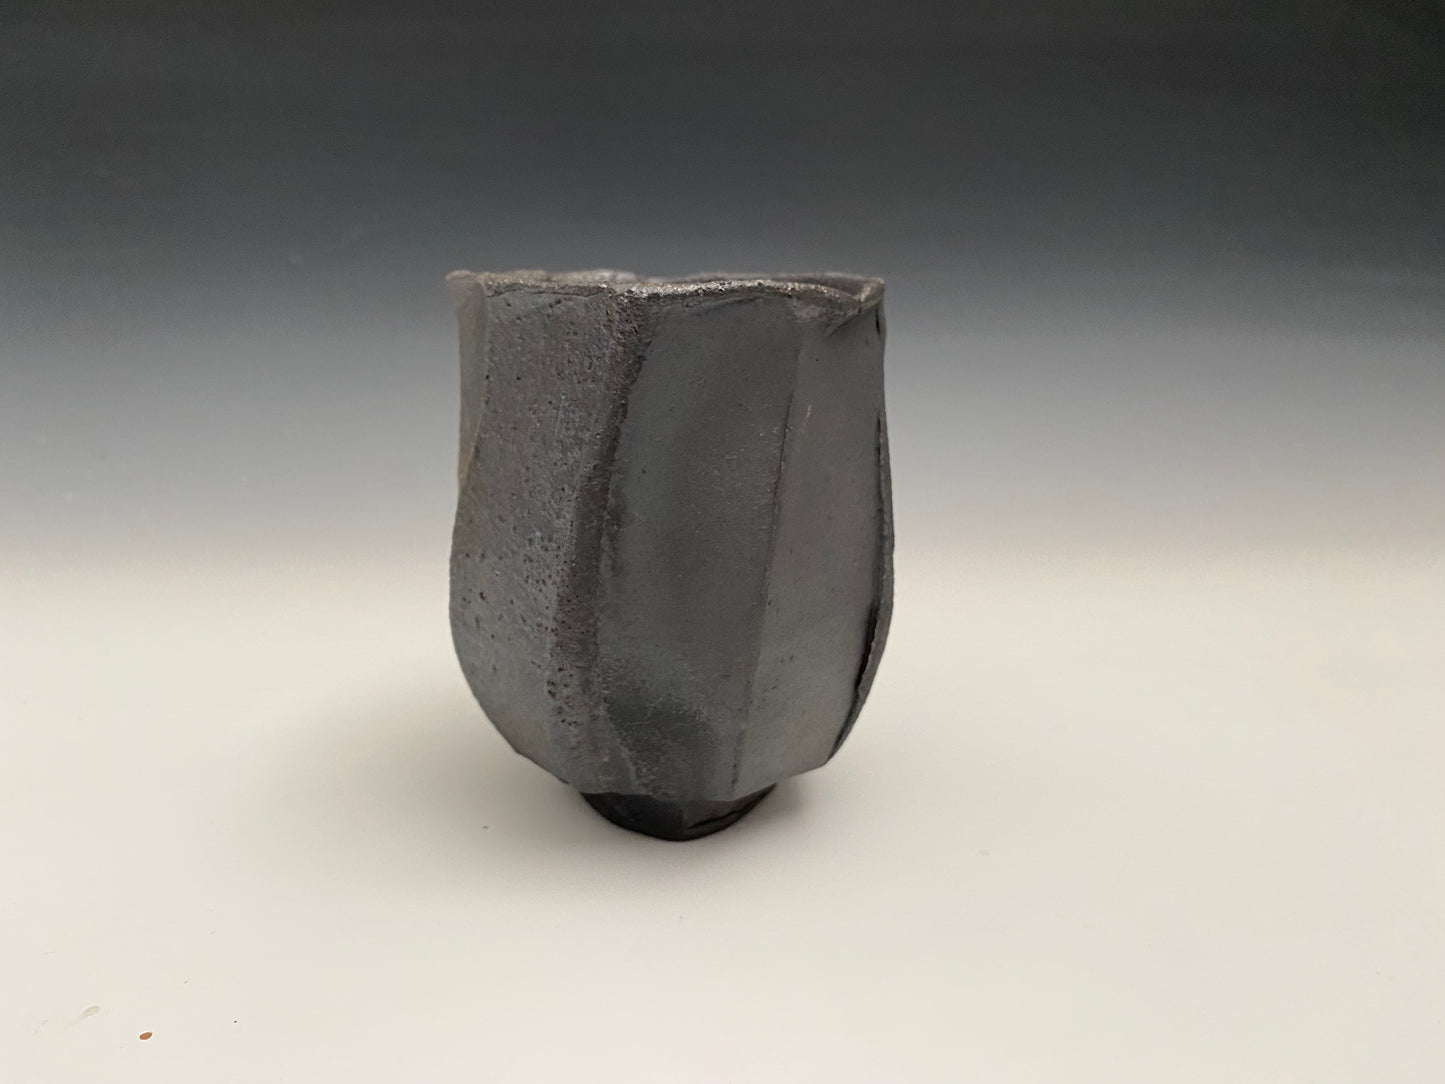 Faceted black clay cup